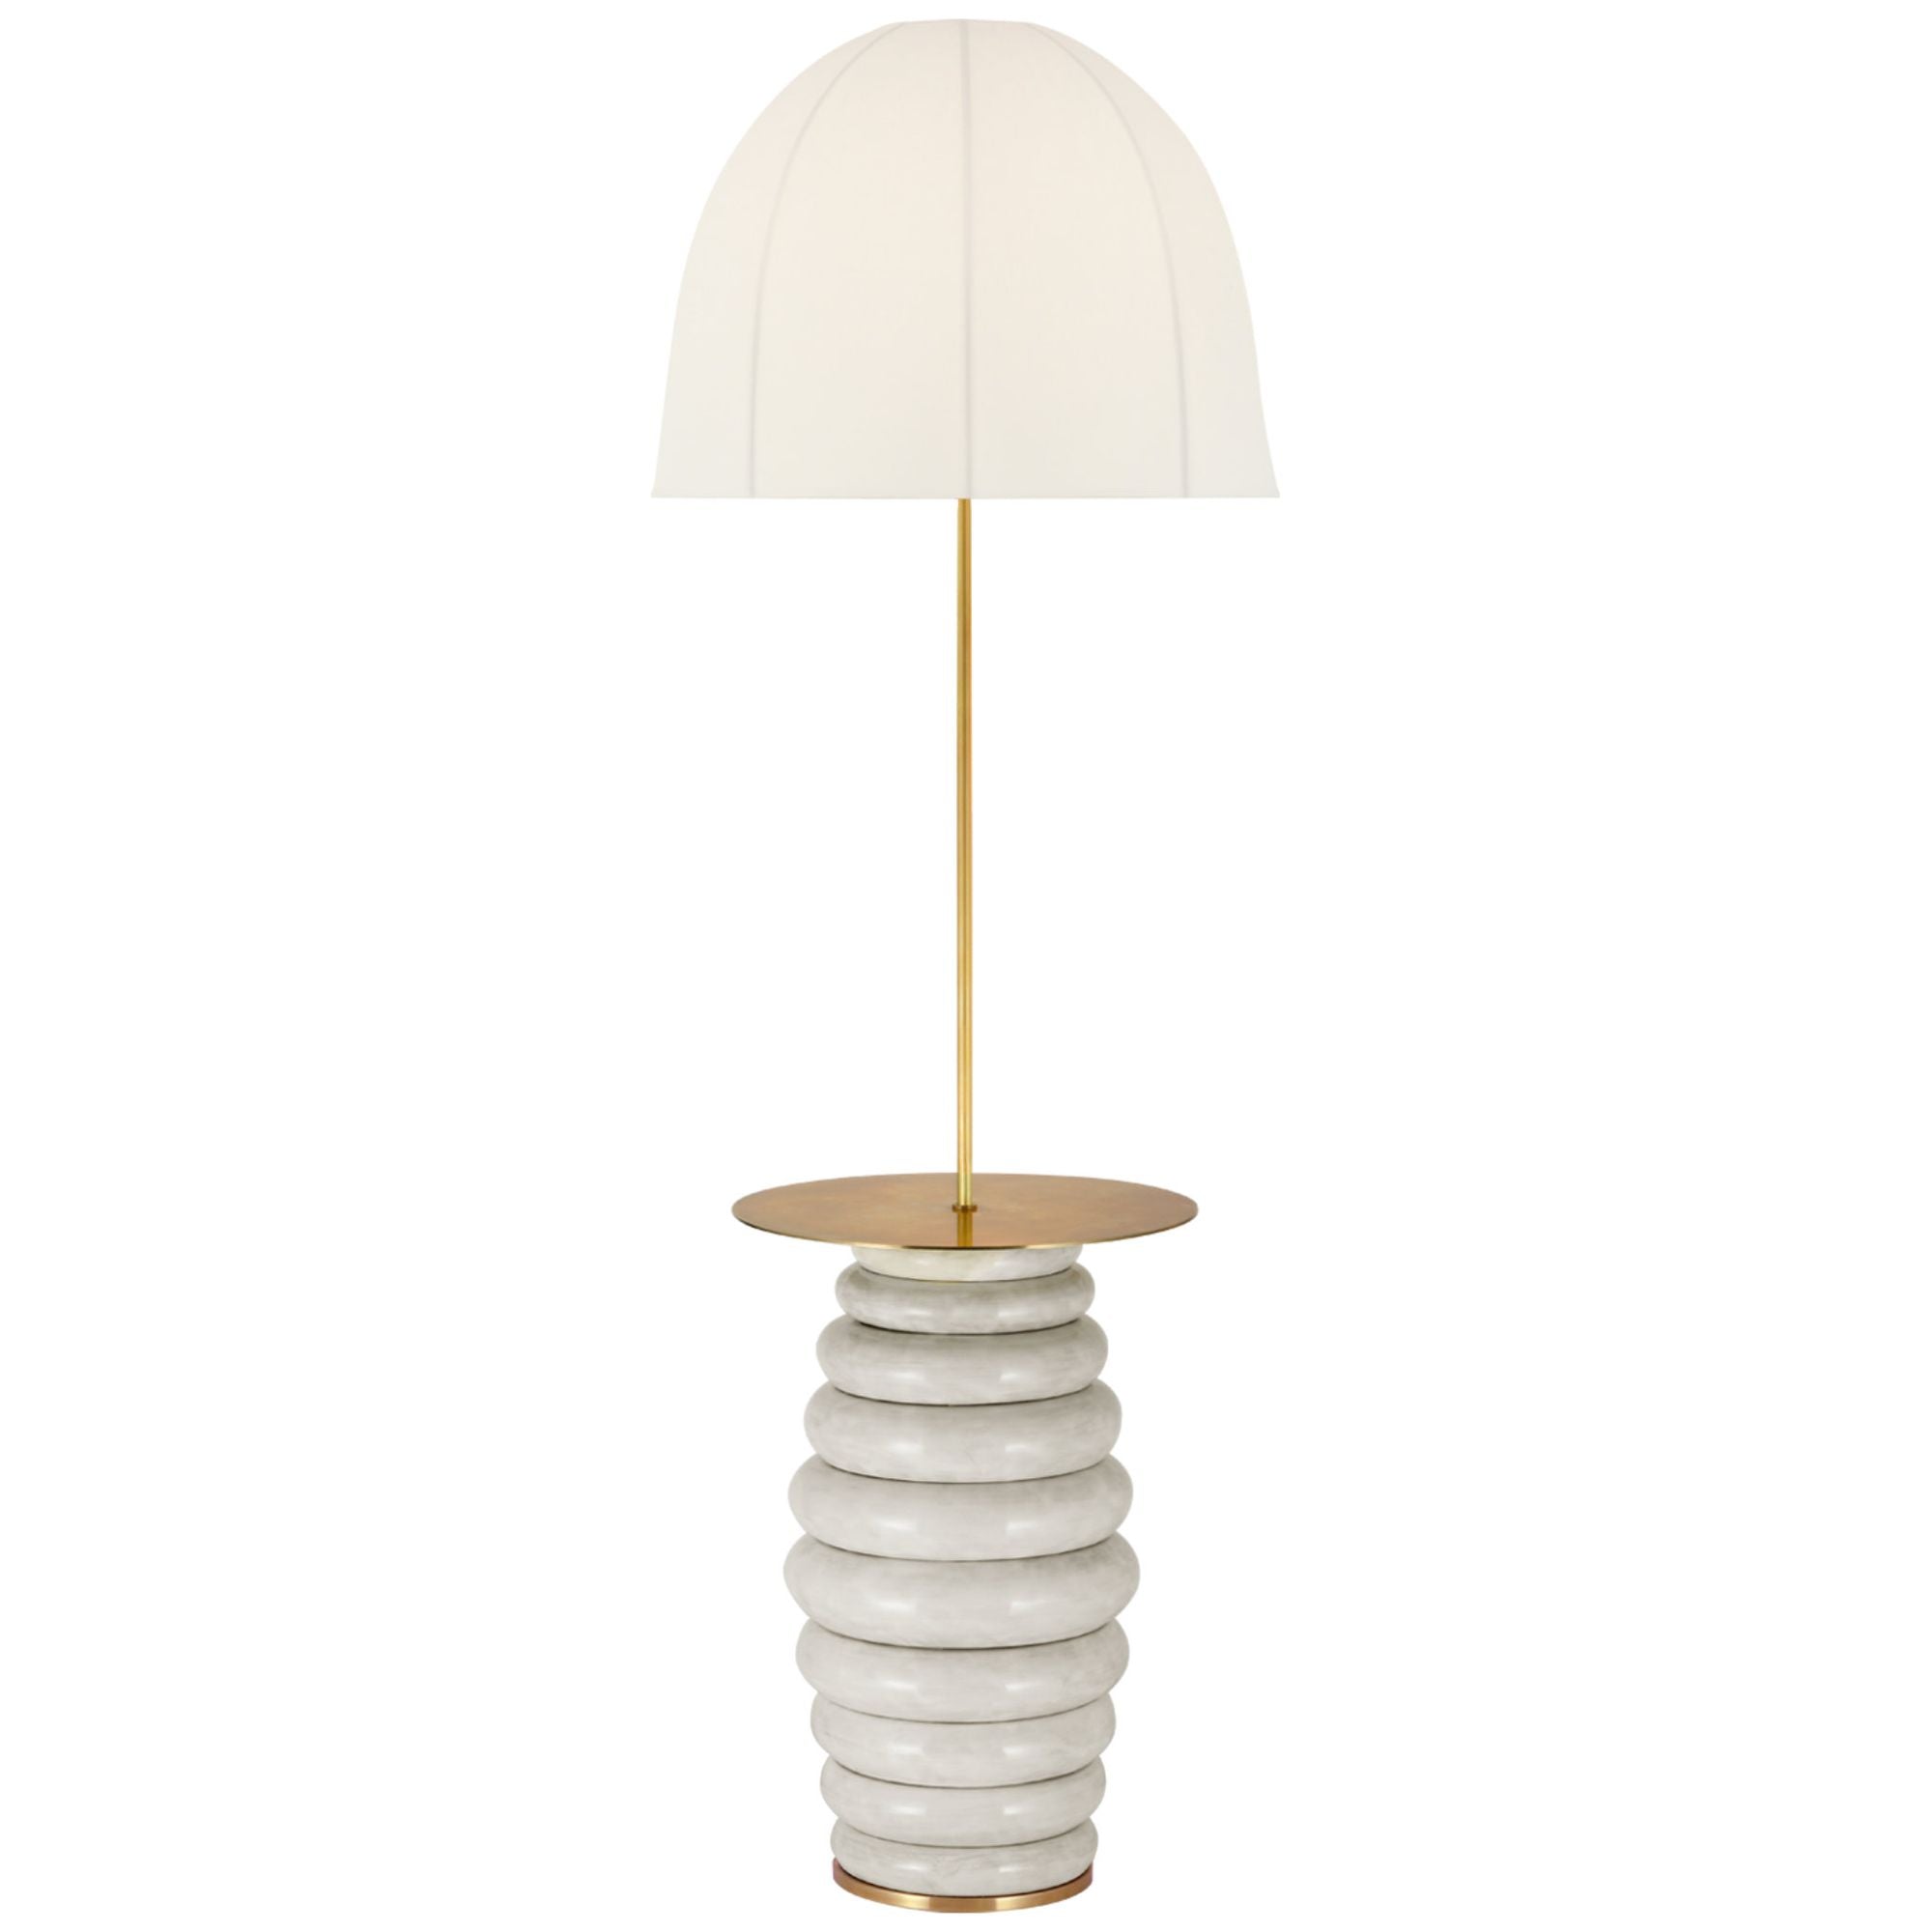 Kelly Wearstler Phoebe Extra Large Tray Table Floor Lamp in Antiqued White with Soft Domed Linen Shade